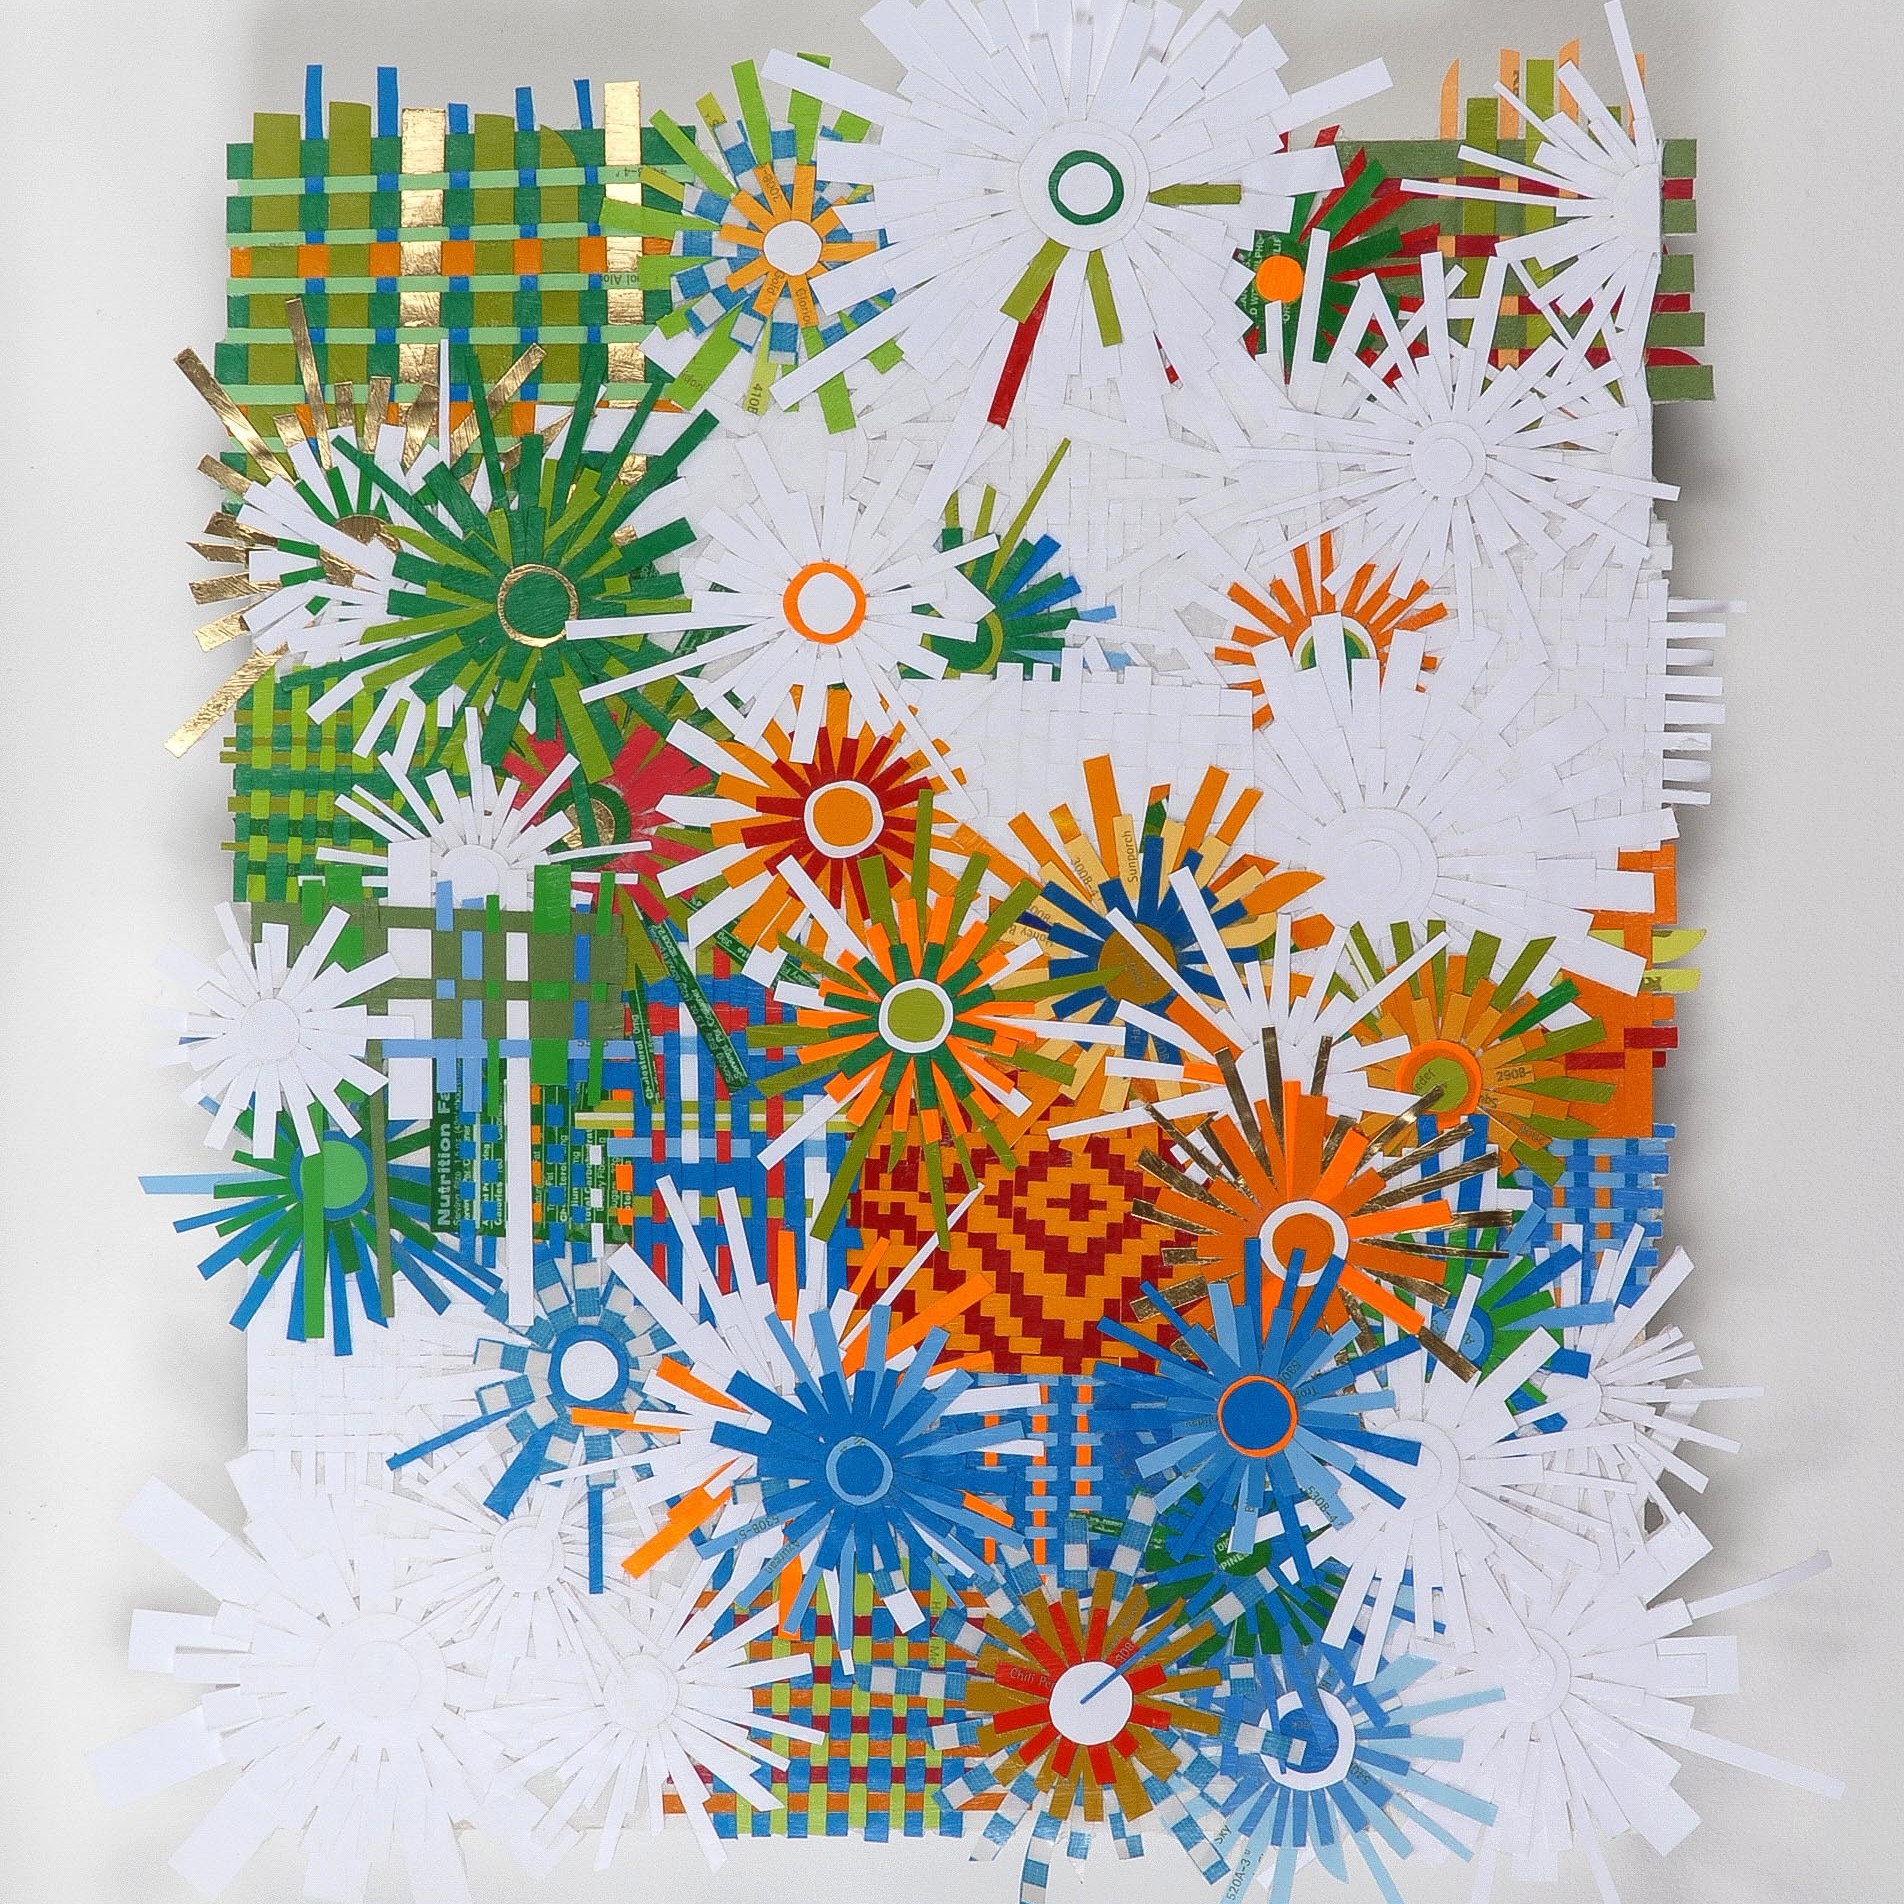 Orange Eclipse - 2009 | Found paper, plastic, and acrylic on wood | 17 x 14 in | Private Collection, Washington, D.C.